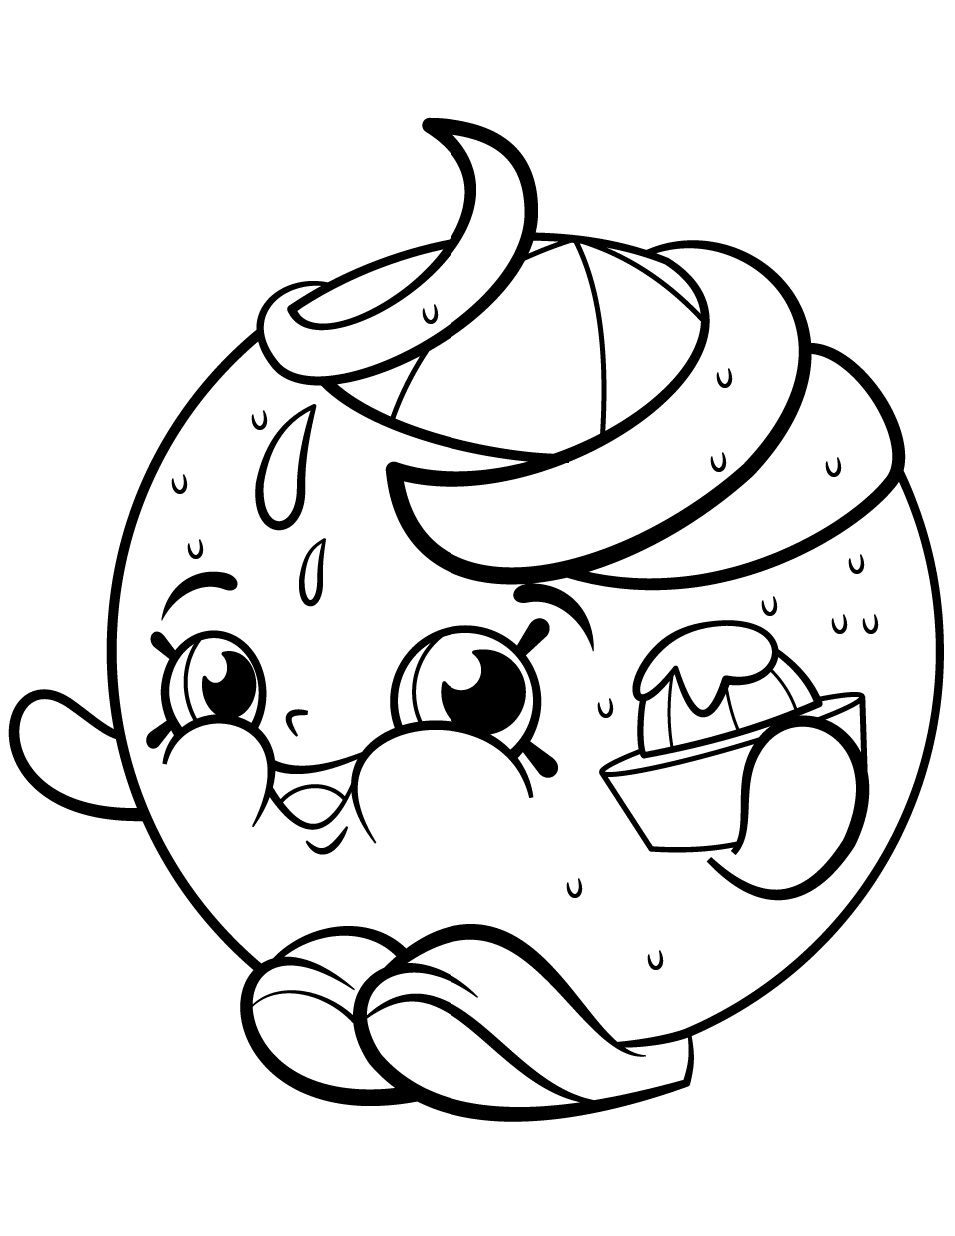 Shopkins Cute Girl 2 Coloring Page - Free Coloring Pages Online